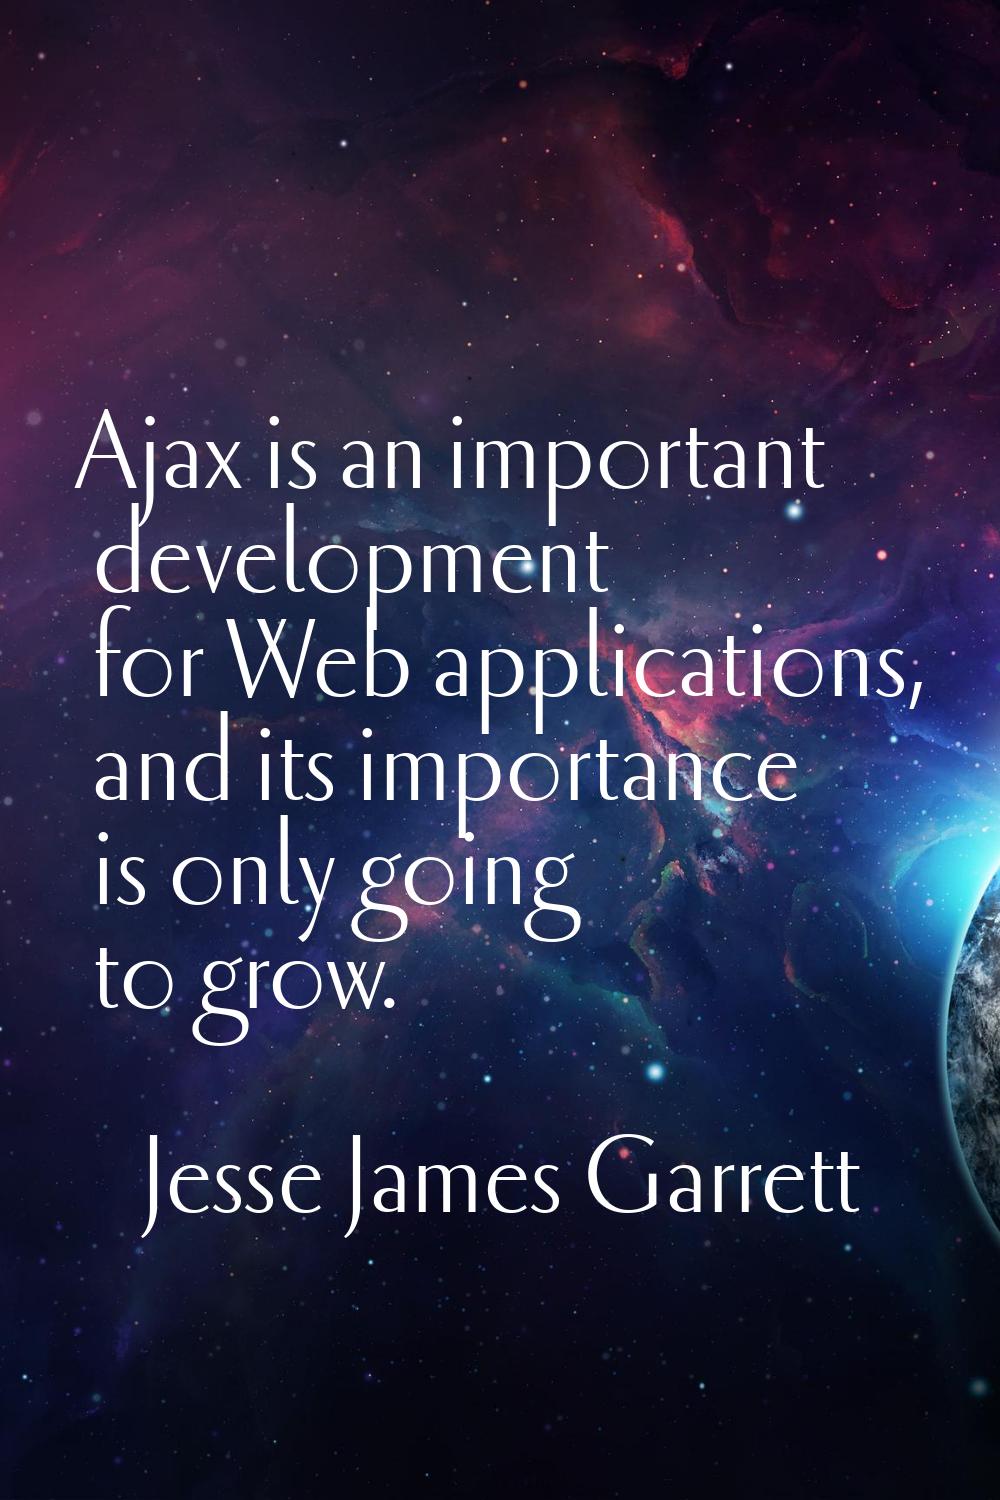 Ajax is an important development for Web applications, and its importance is only going to grow.